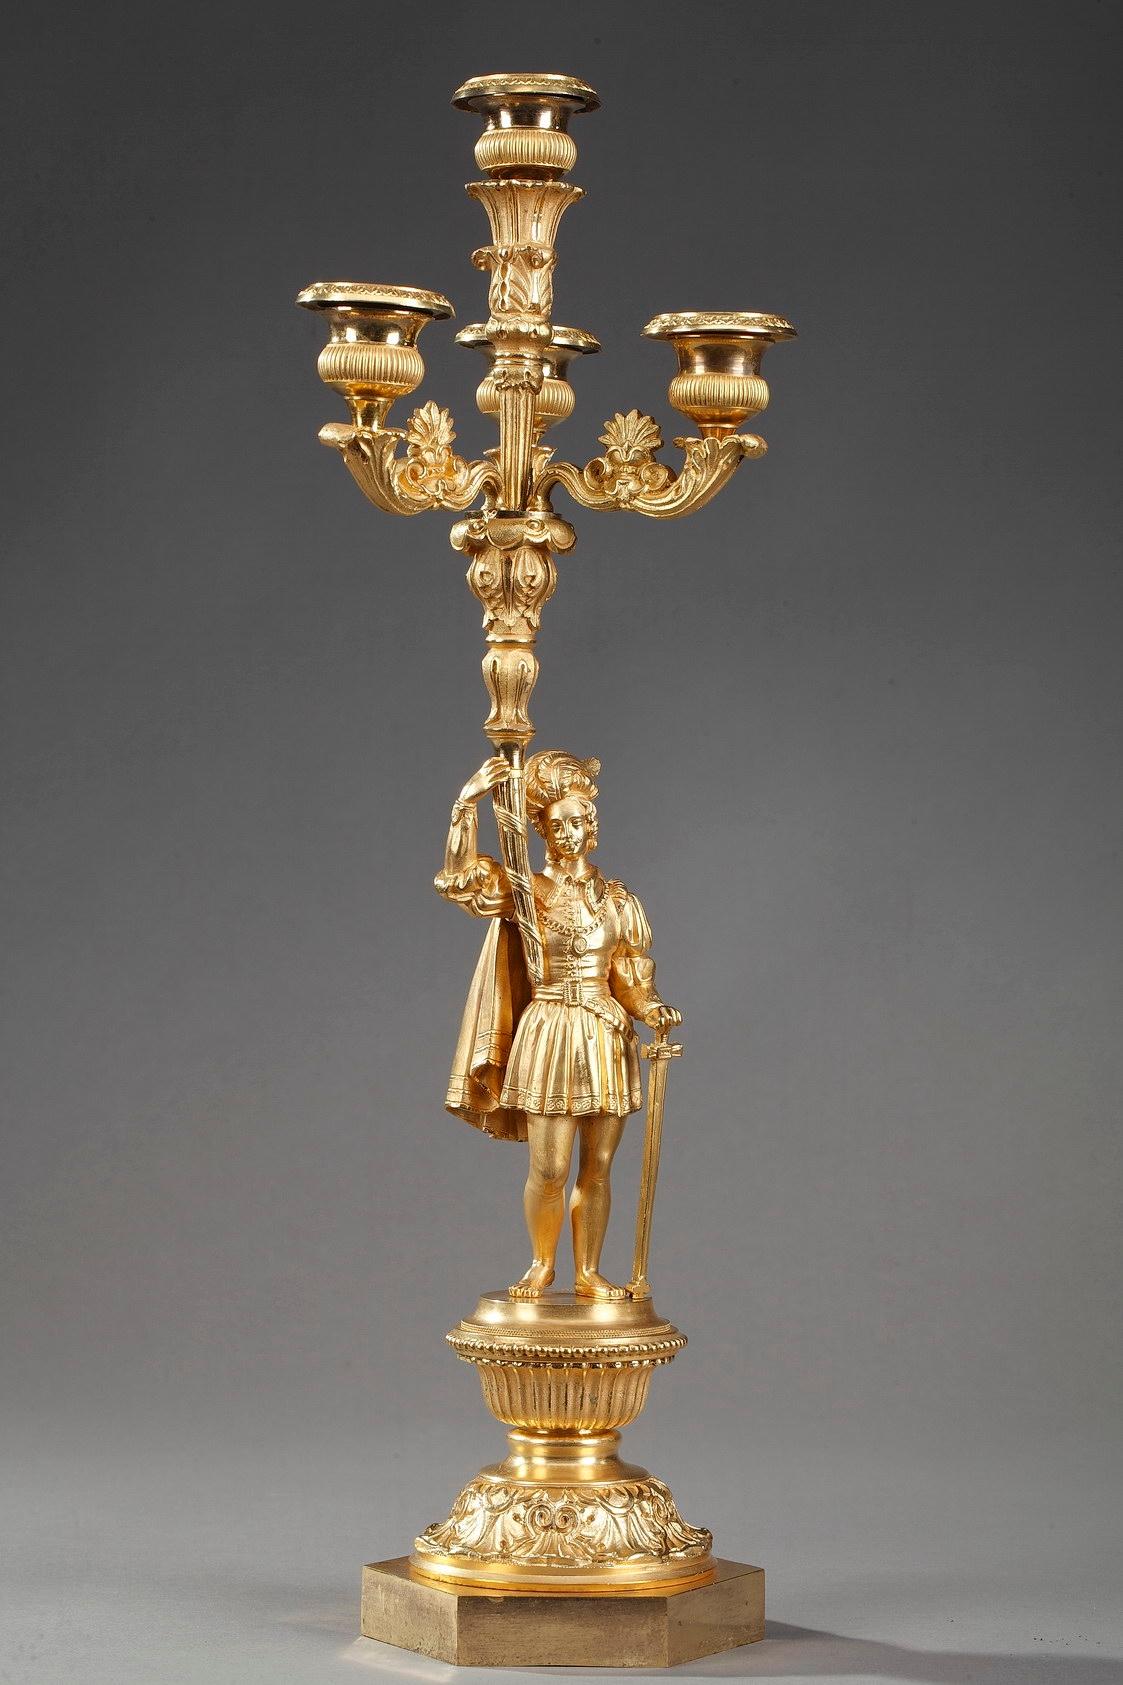 Two candelabra lamps, each with four branches, resting on a foliated and hexagonal base. They feature a courteous scene with an elegant lady giving a favour to a knight about to do battle. Courtly love was a medieval European literary conception of